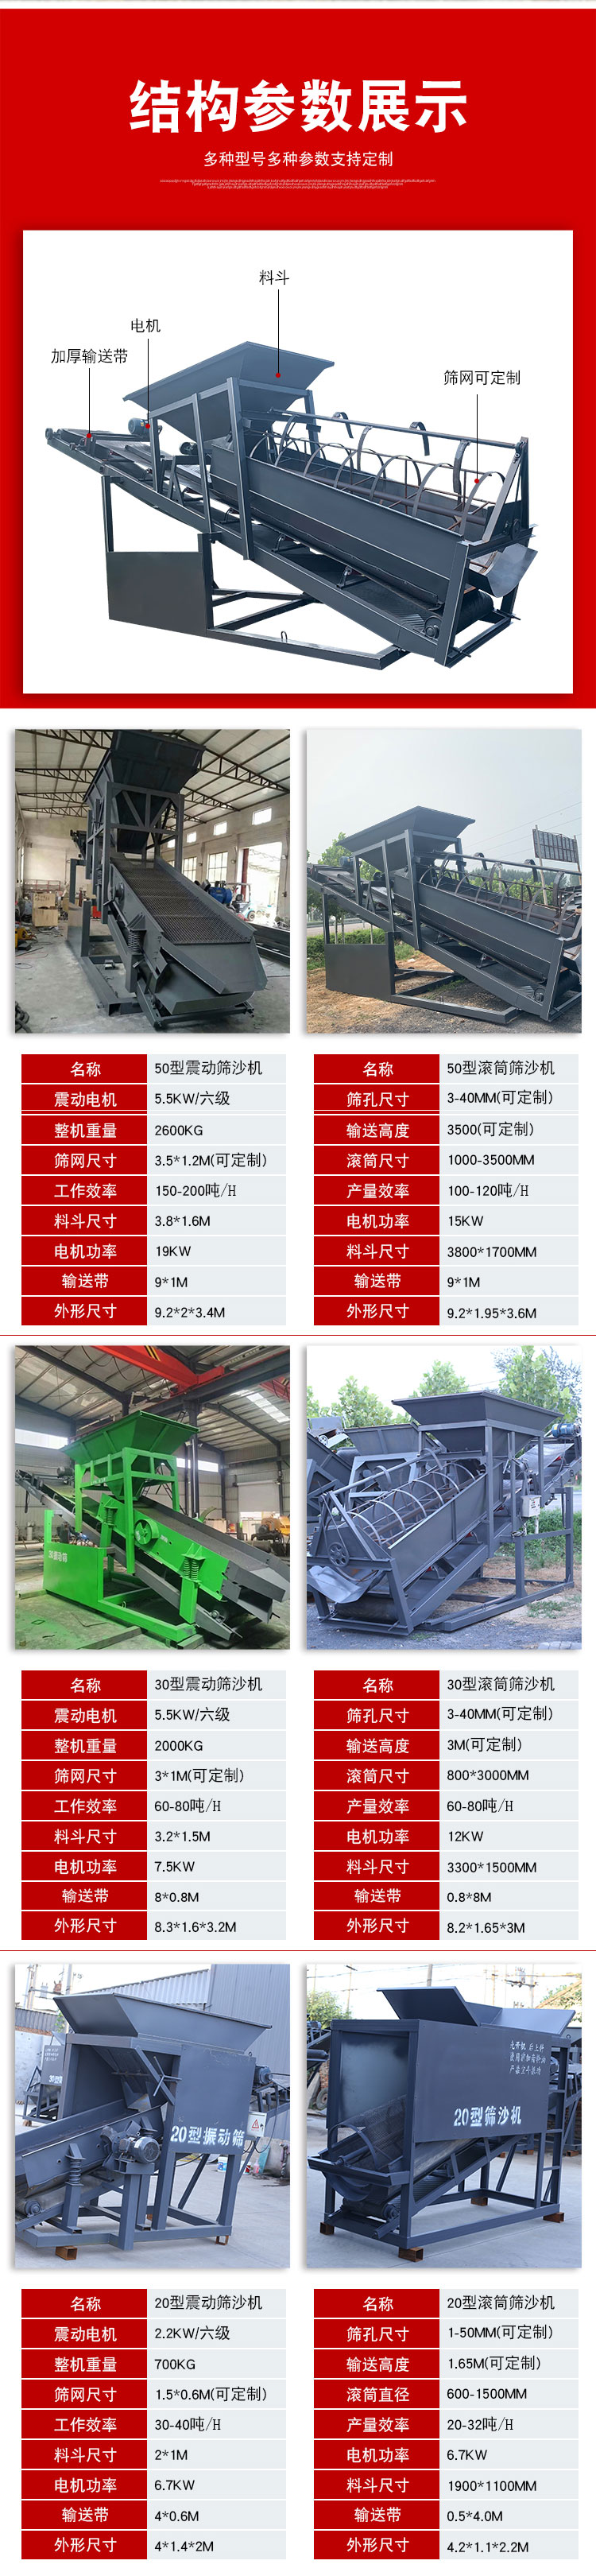 Sand screening machine 20/30/50 sand and gravel separator fully automatic vibrating screen drum screen